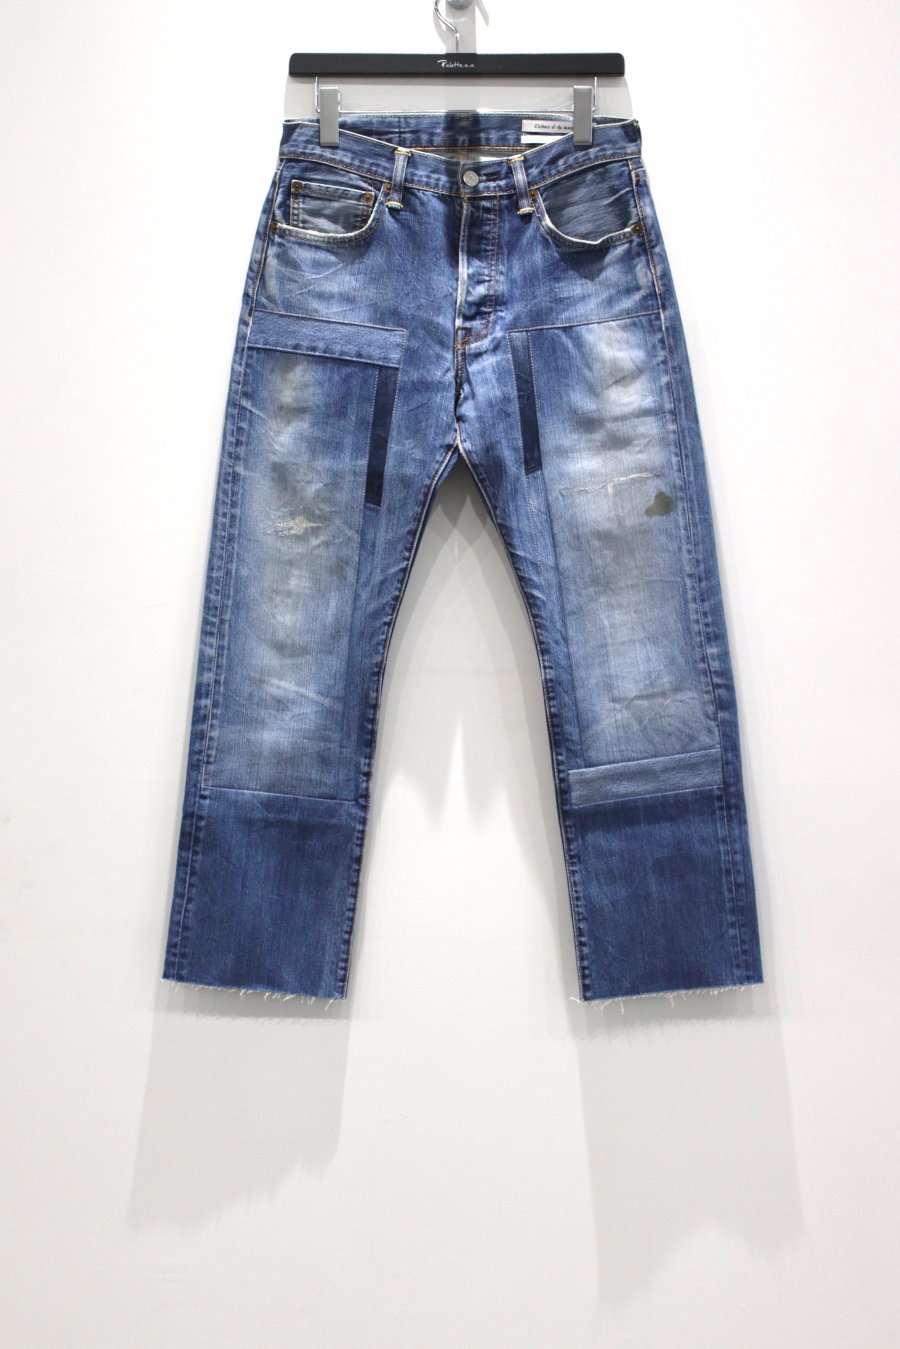 Children of the discordance  NY VINTAGE CUSTOMMADE PATCH DENIM A<img class='new_mark_img2' src='https://img.shop-pro.jp/img/new/icons15.gif' style='border:none;display:inline;margin:0px;padding:0px;width:auto;' />